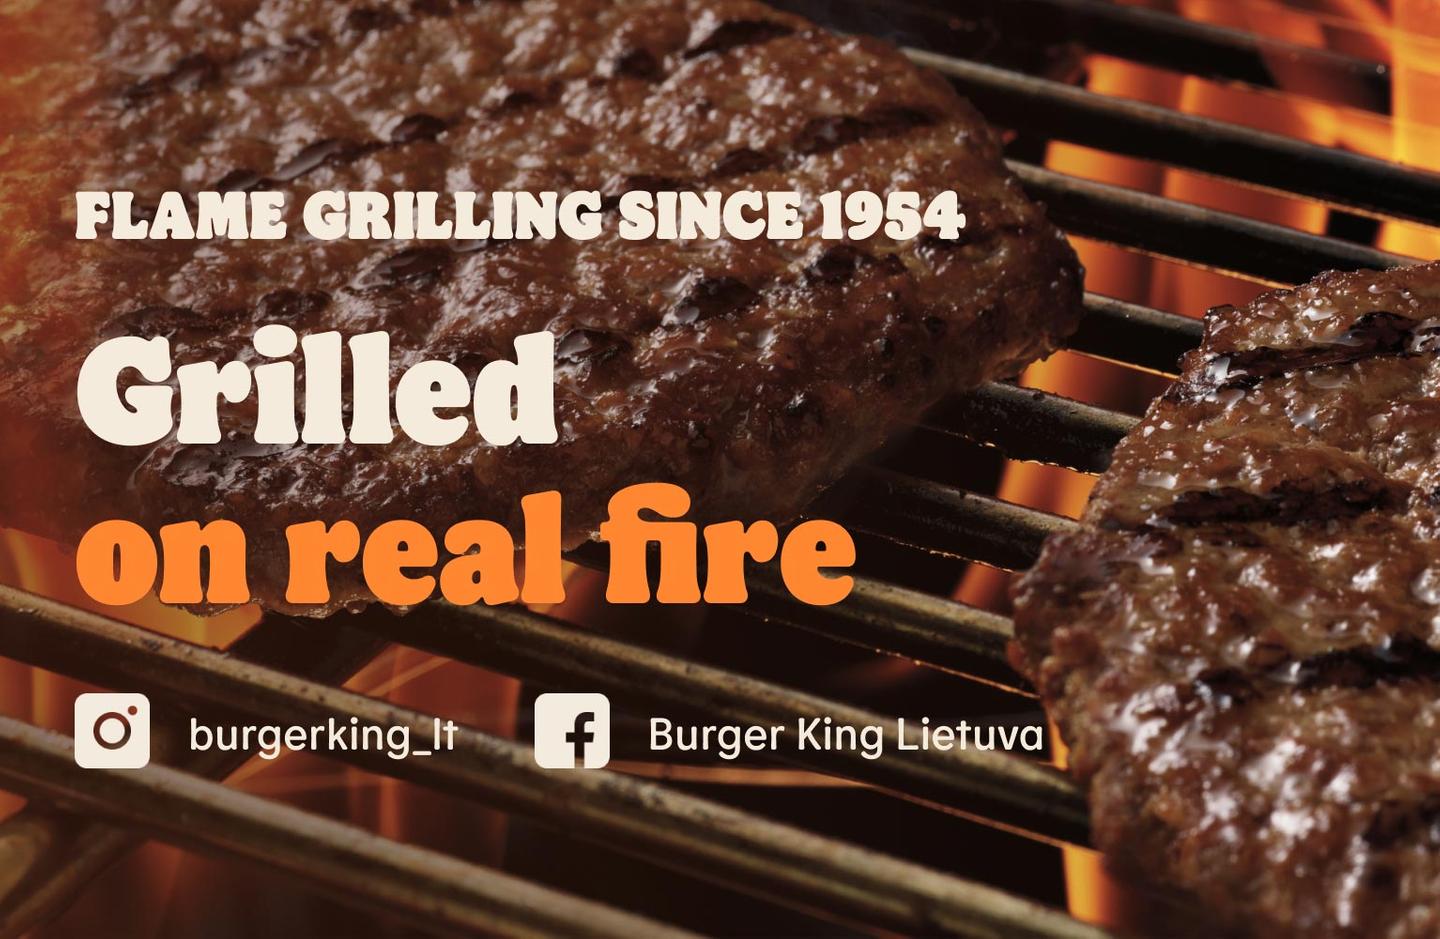 Grilled on real fire